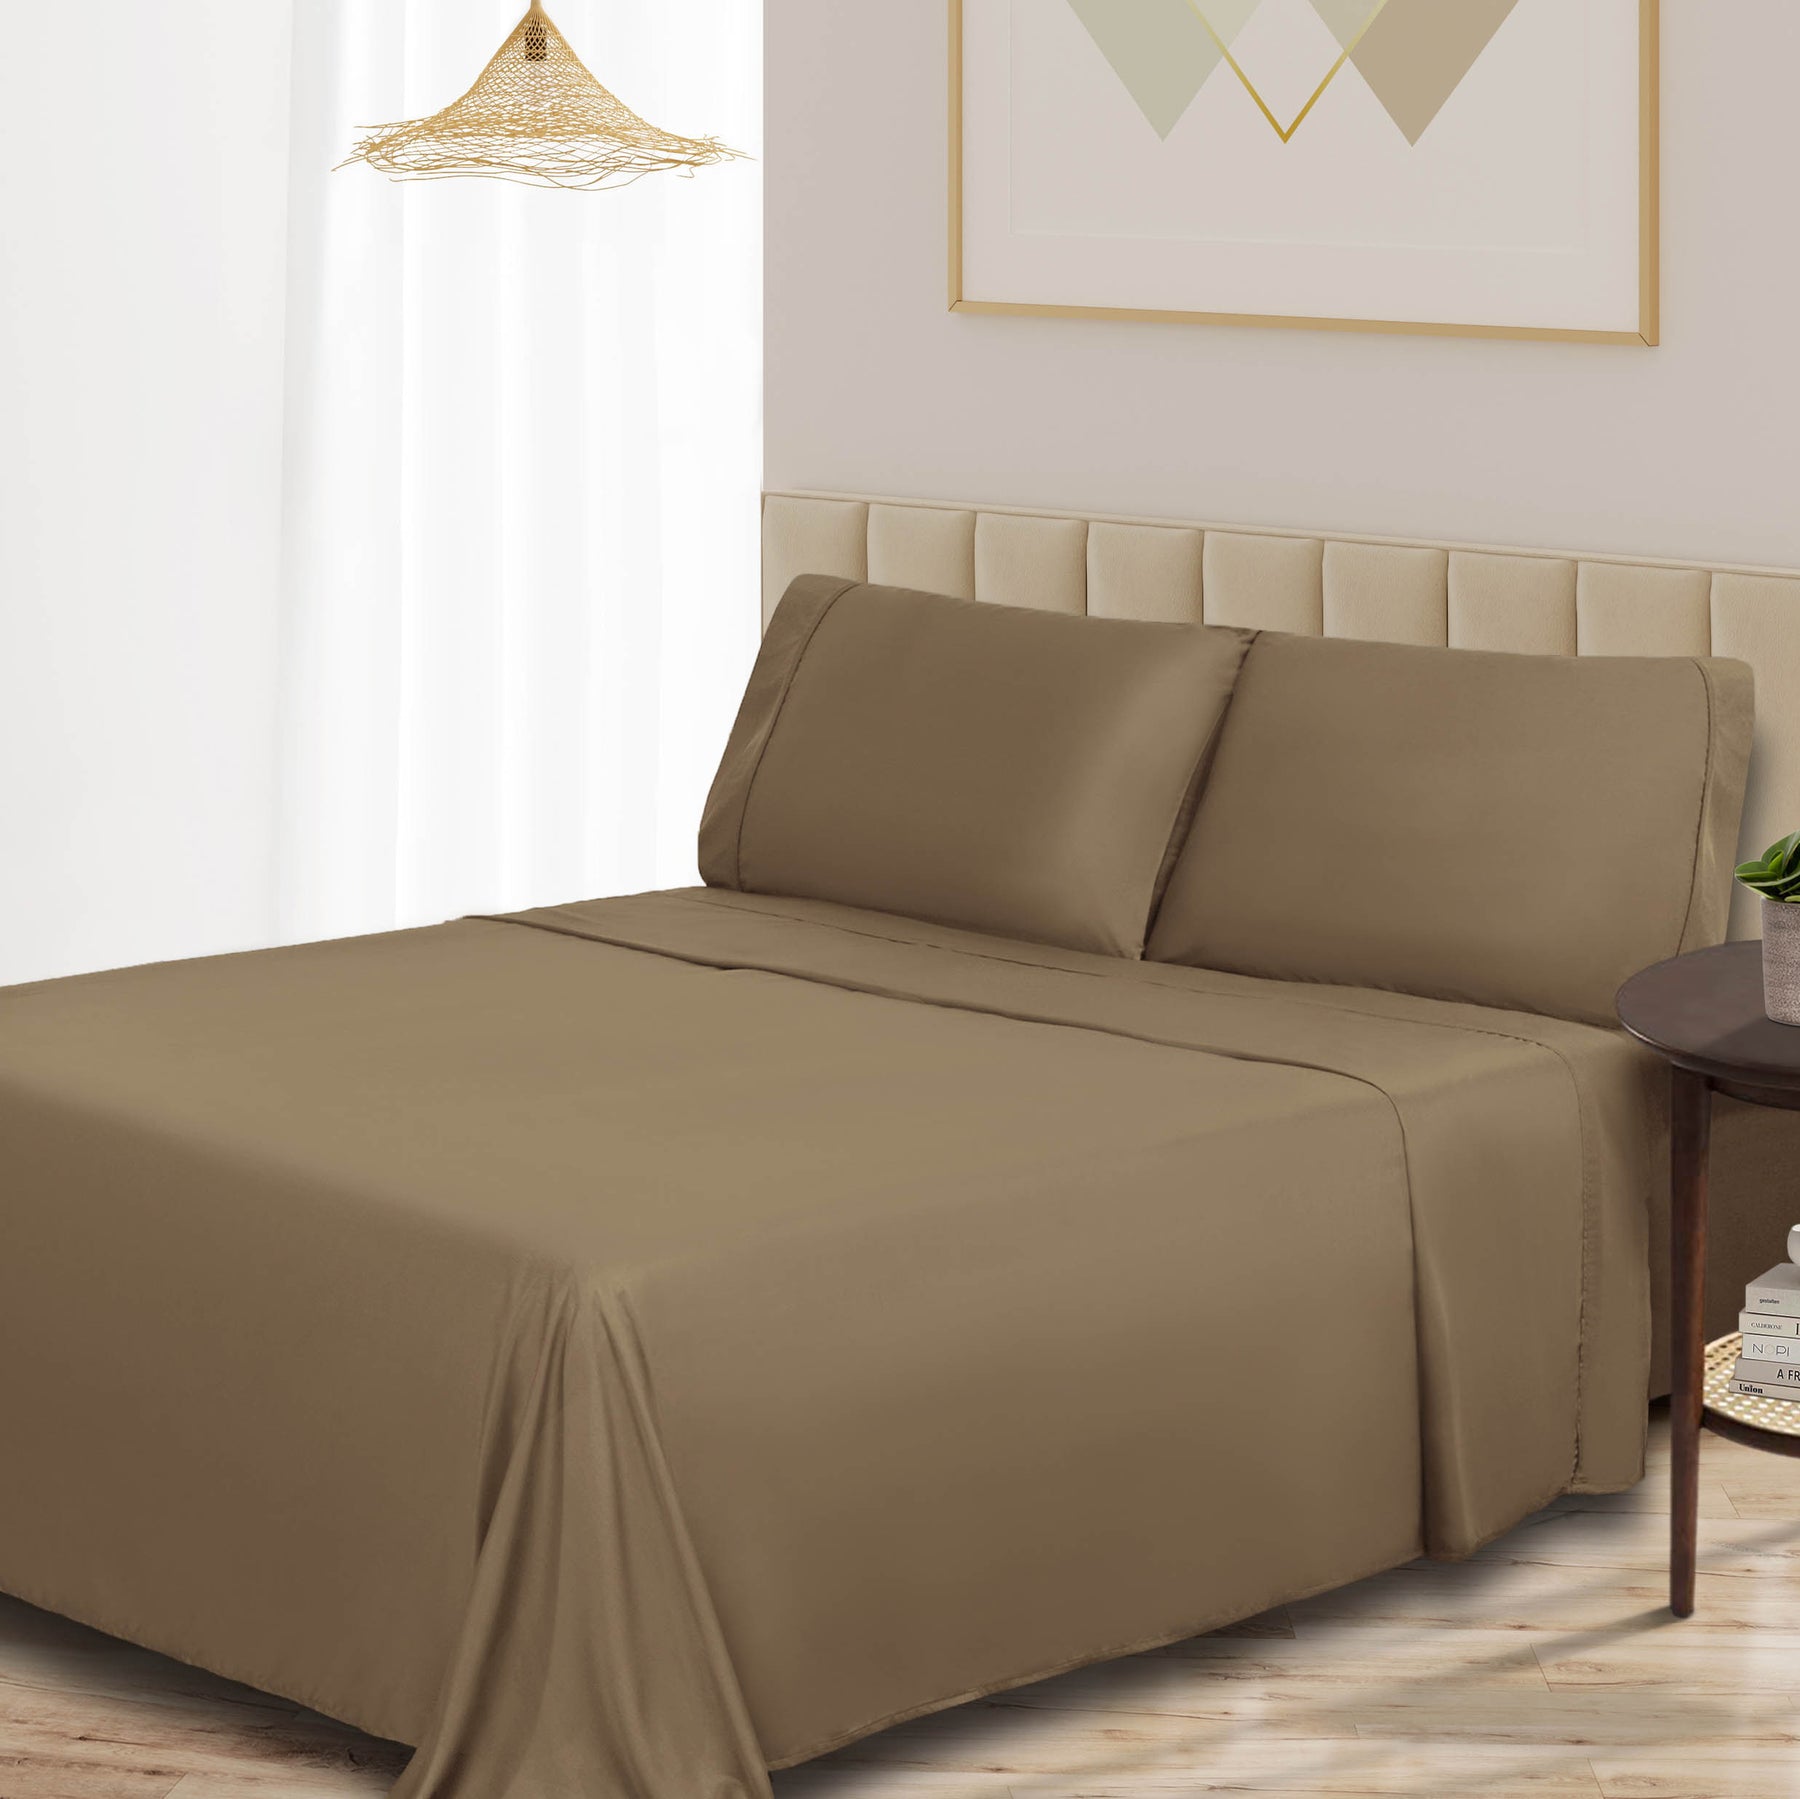 300 Thread Count Rayon From Bamboo Solid Deep Pocket Sheet Set - Taupe